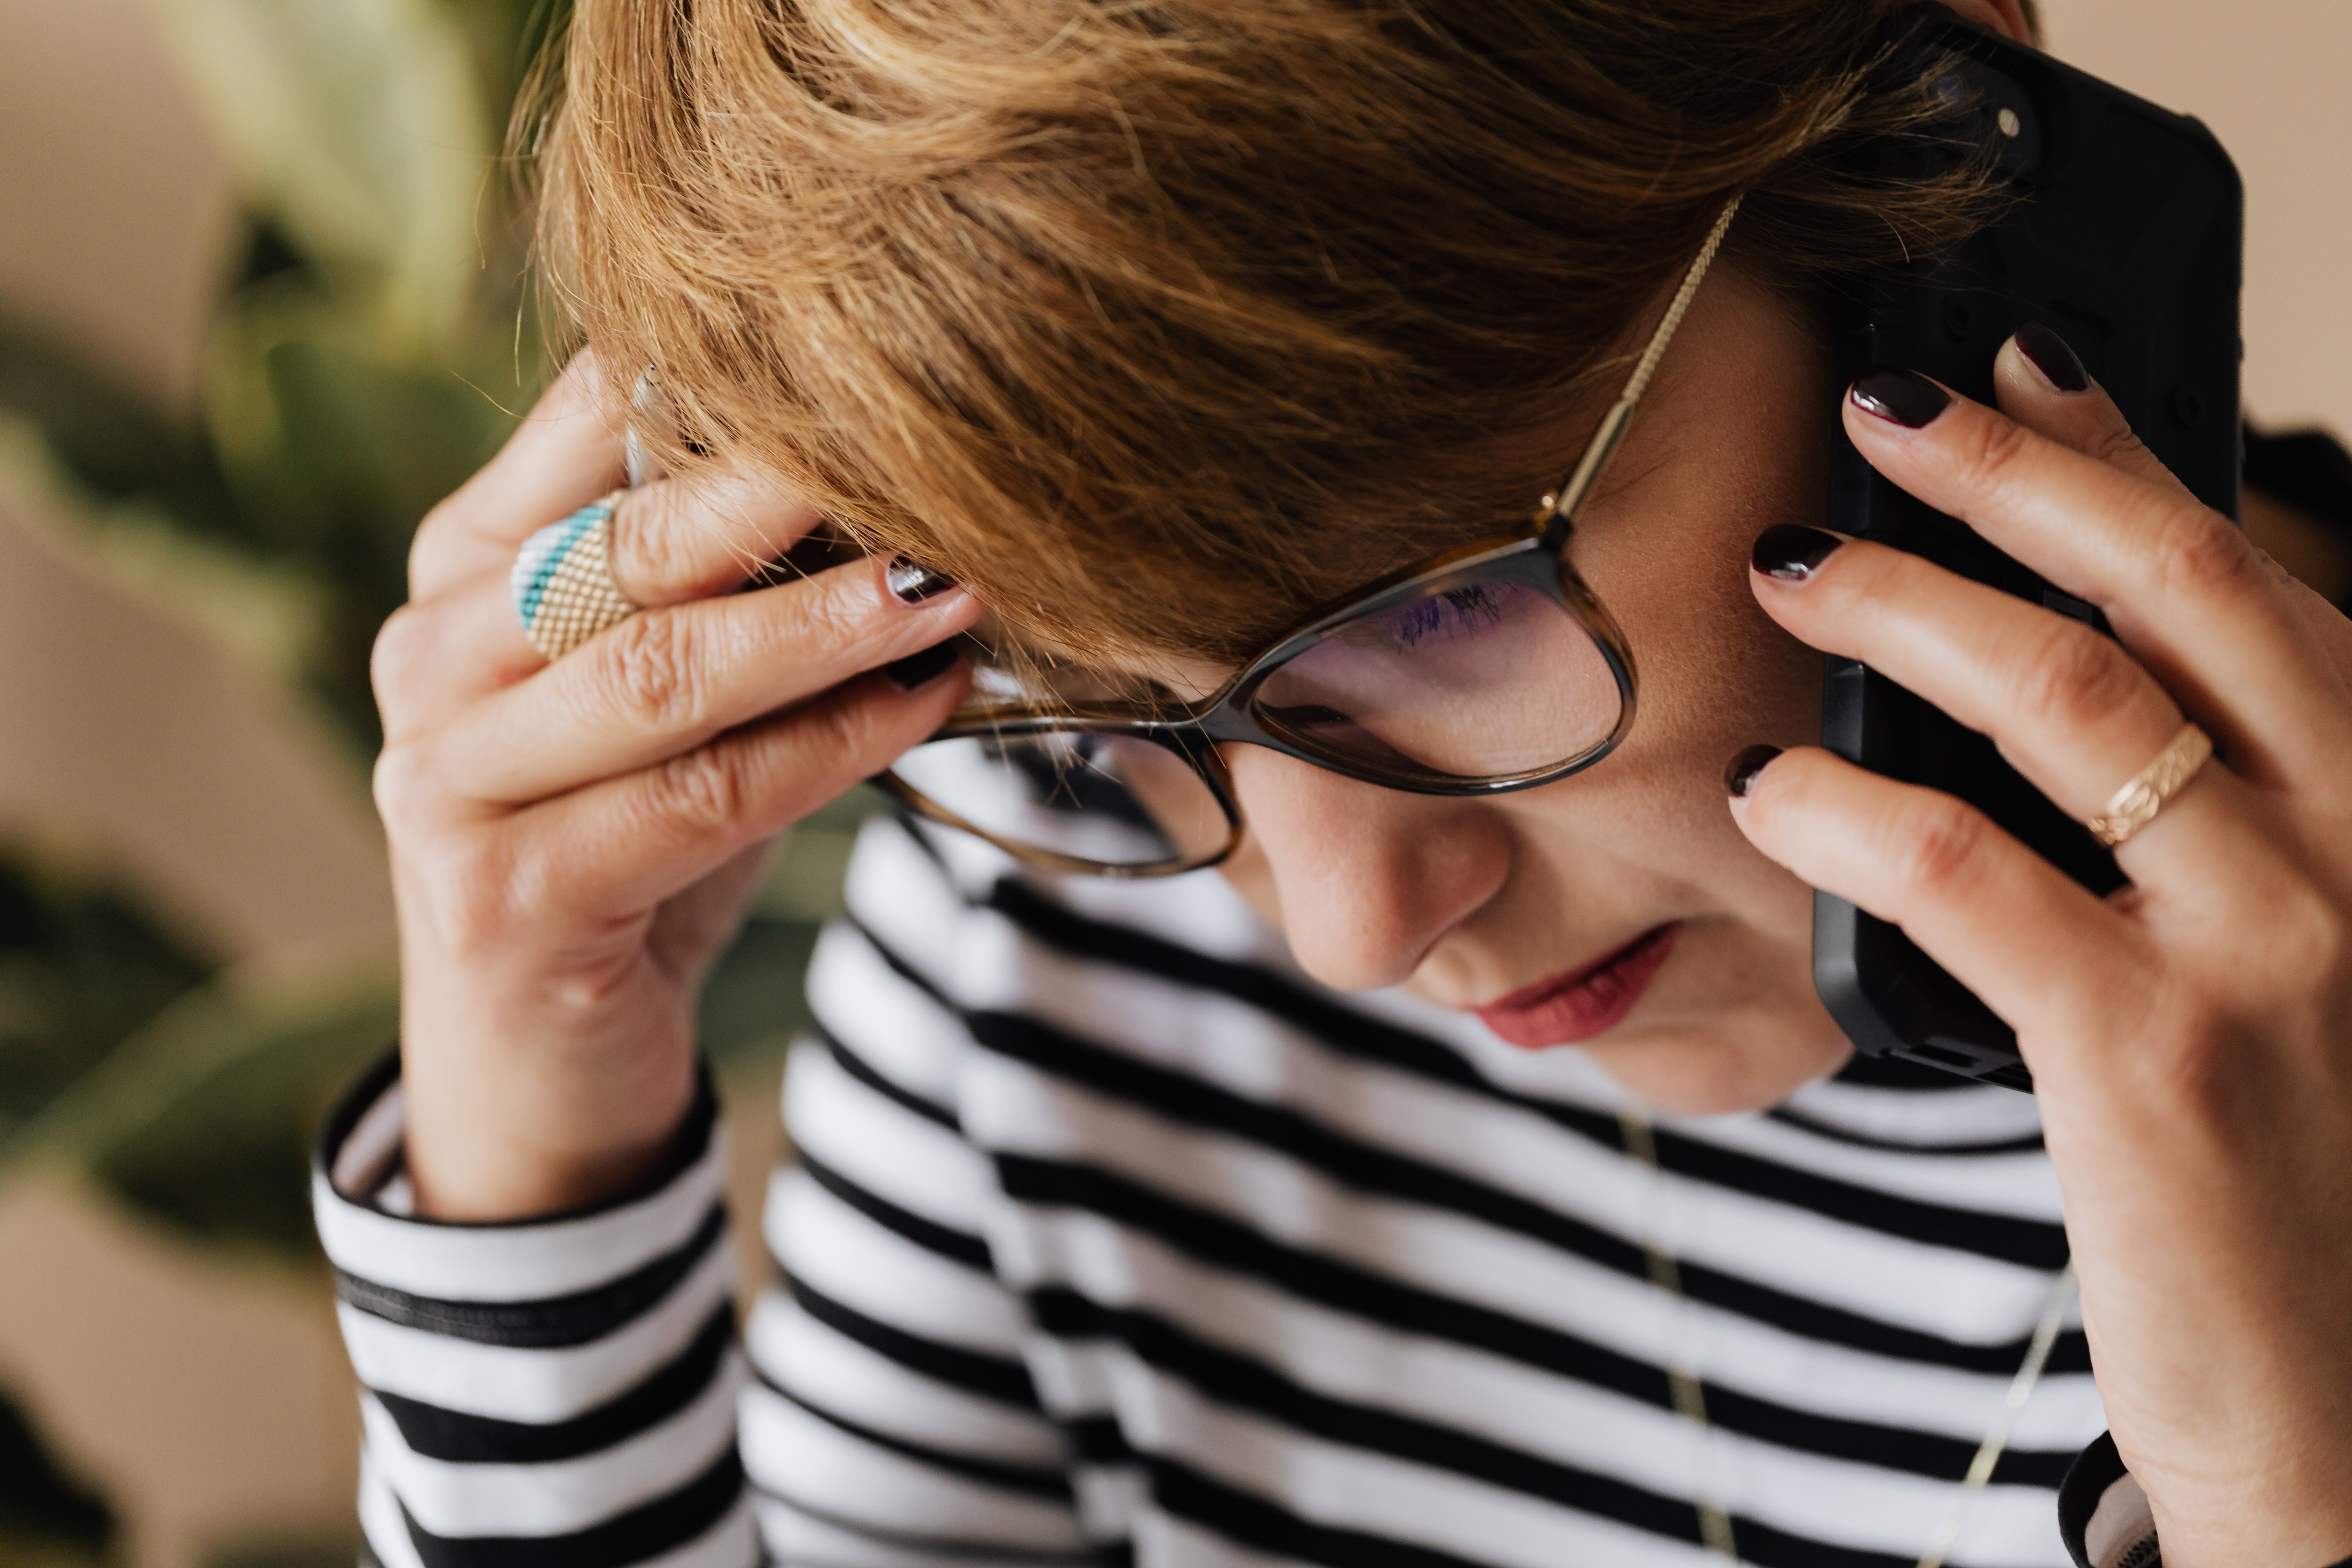 Cindy picked up the call excitedly, and Larry watched her face fall dramatically | Source: Pexels